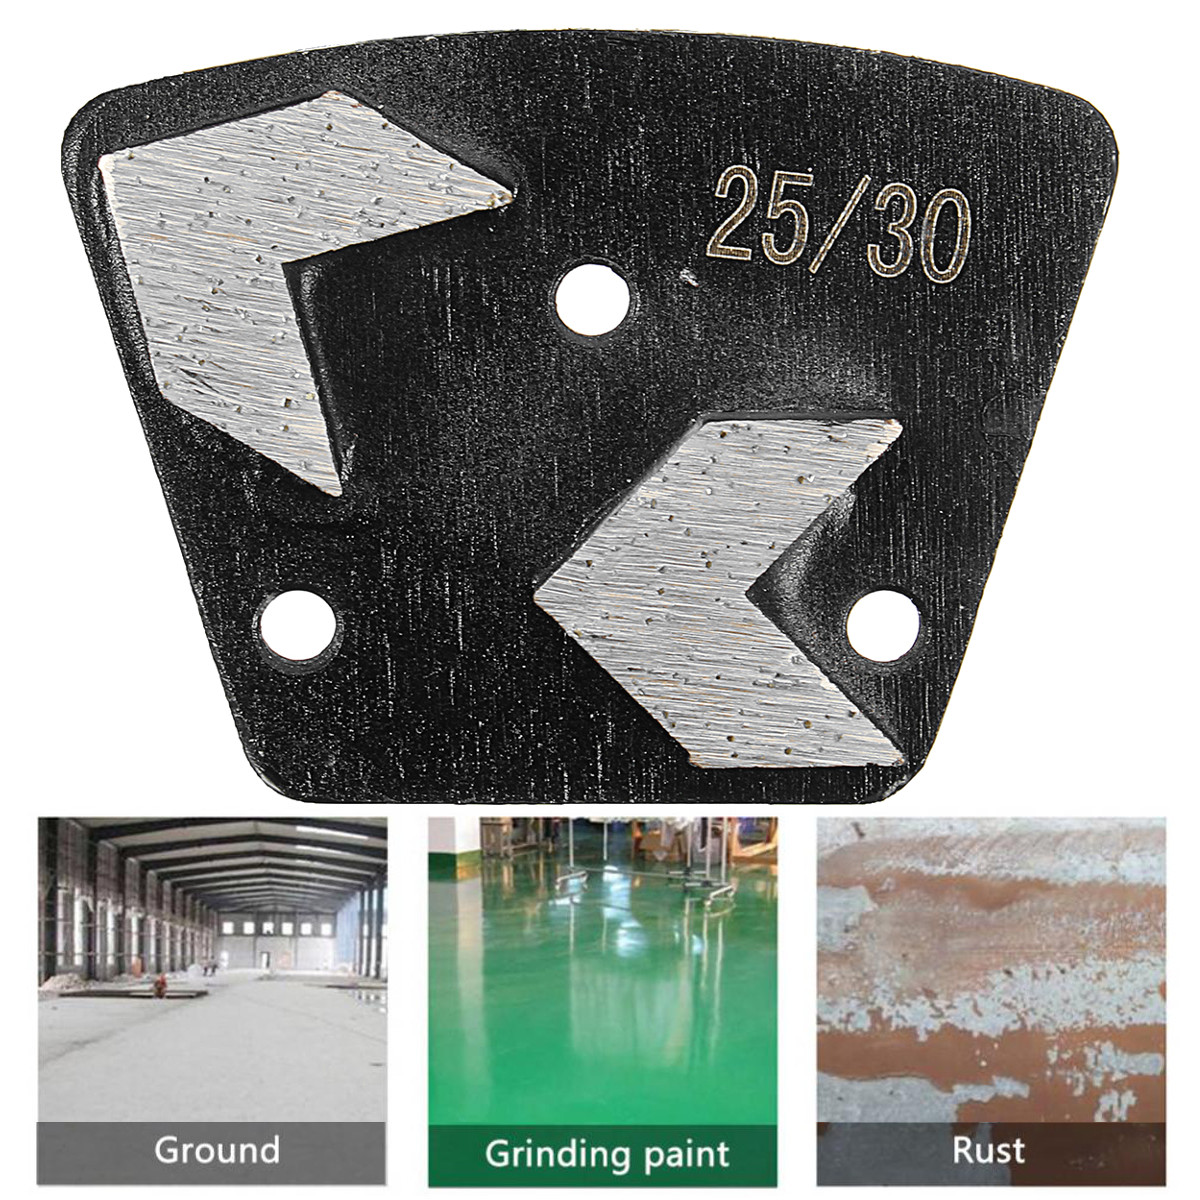 2530-Grit-Medium-Bond-Plate-Trapezoid-Grinding-Disc-for-Bolt-On-Grinders-1349216-10